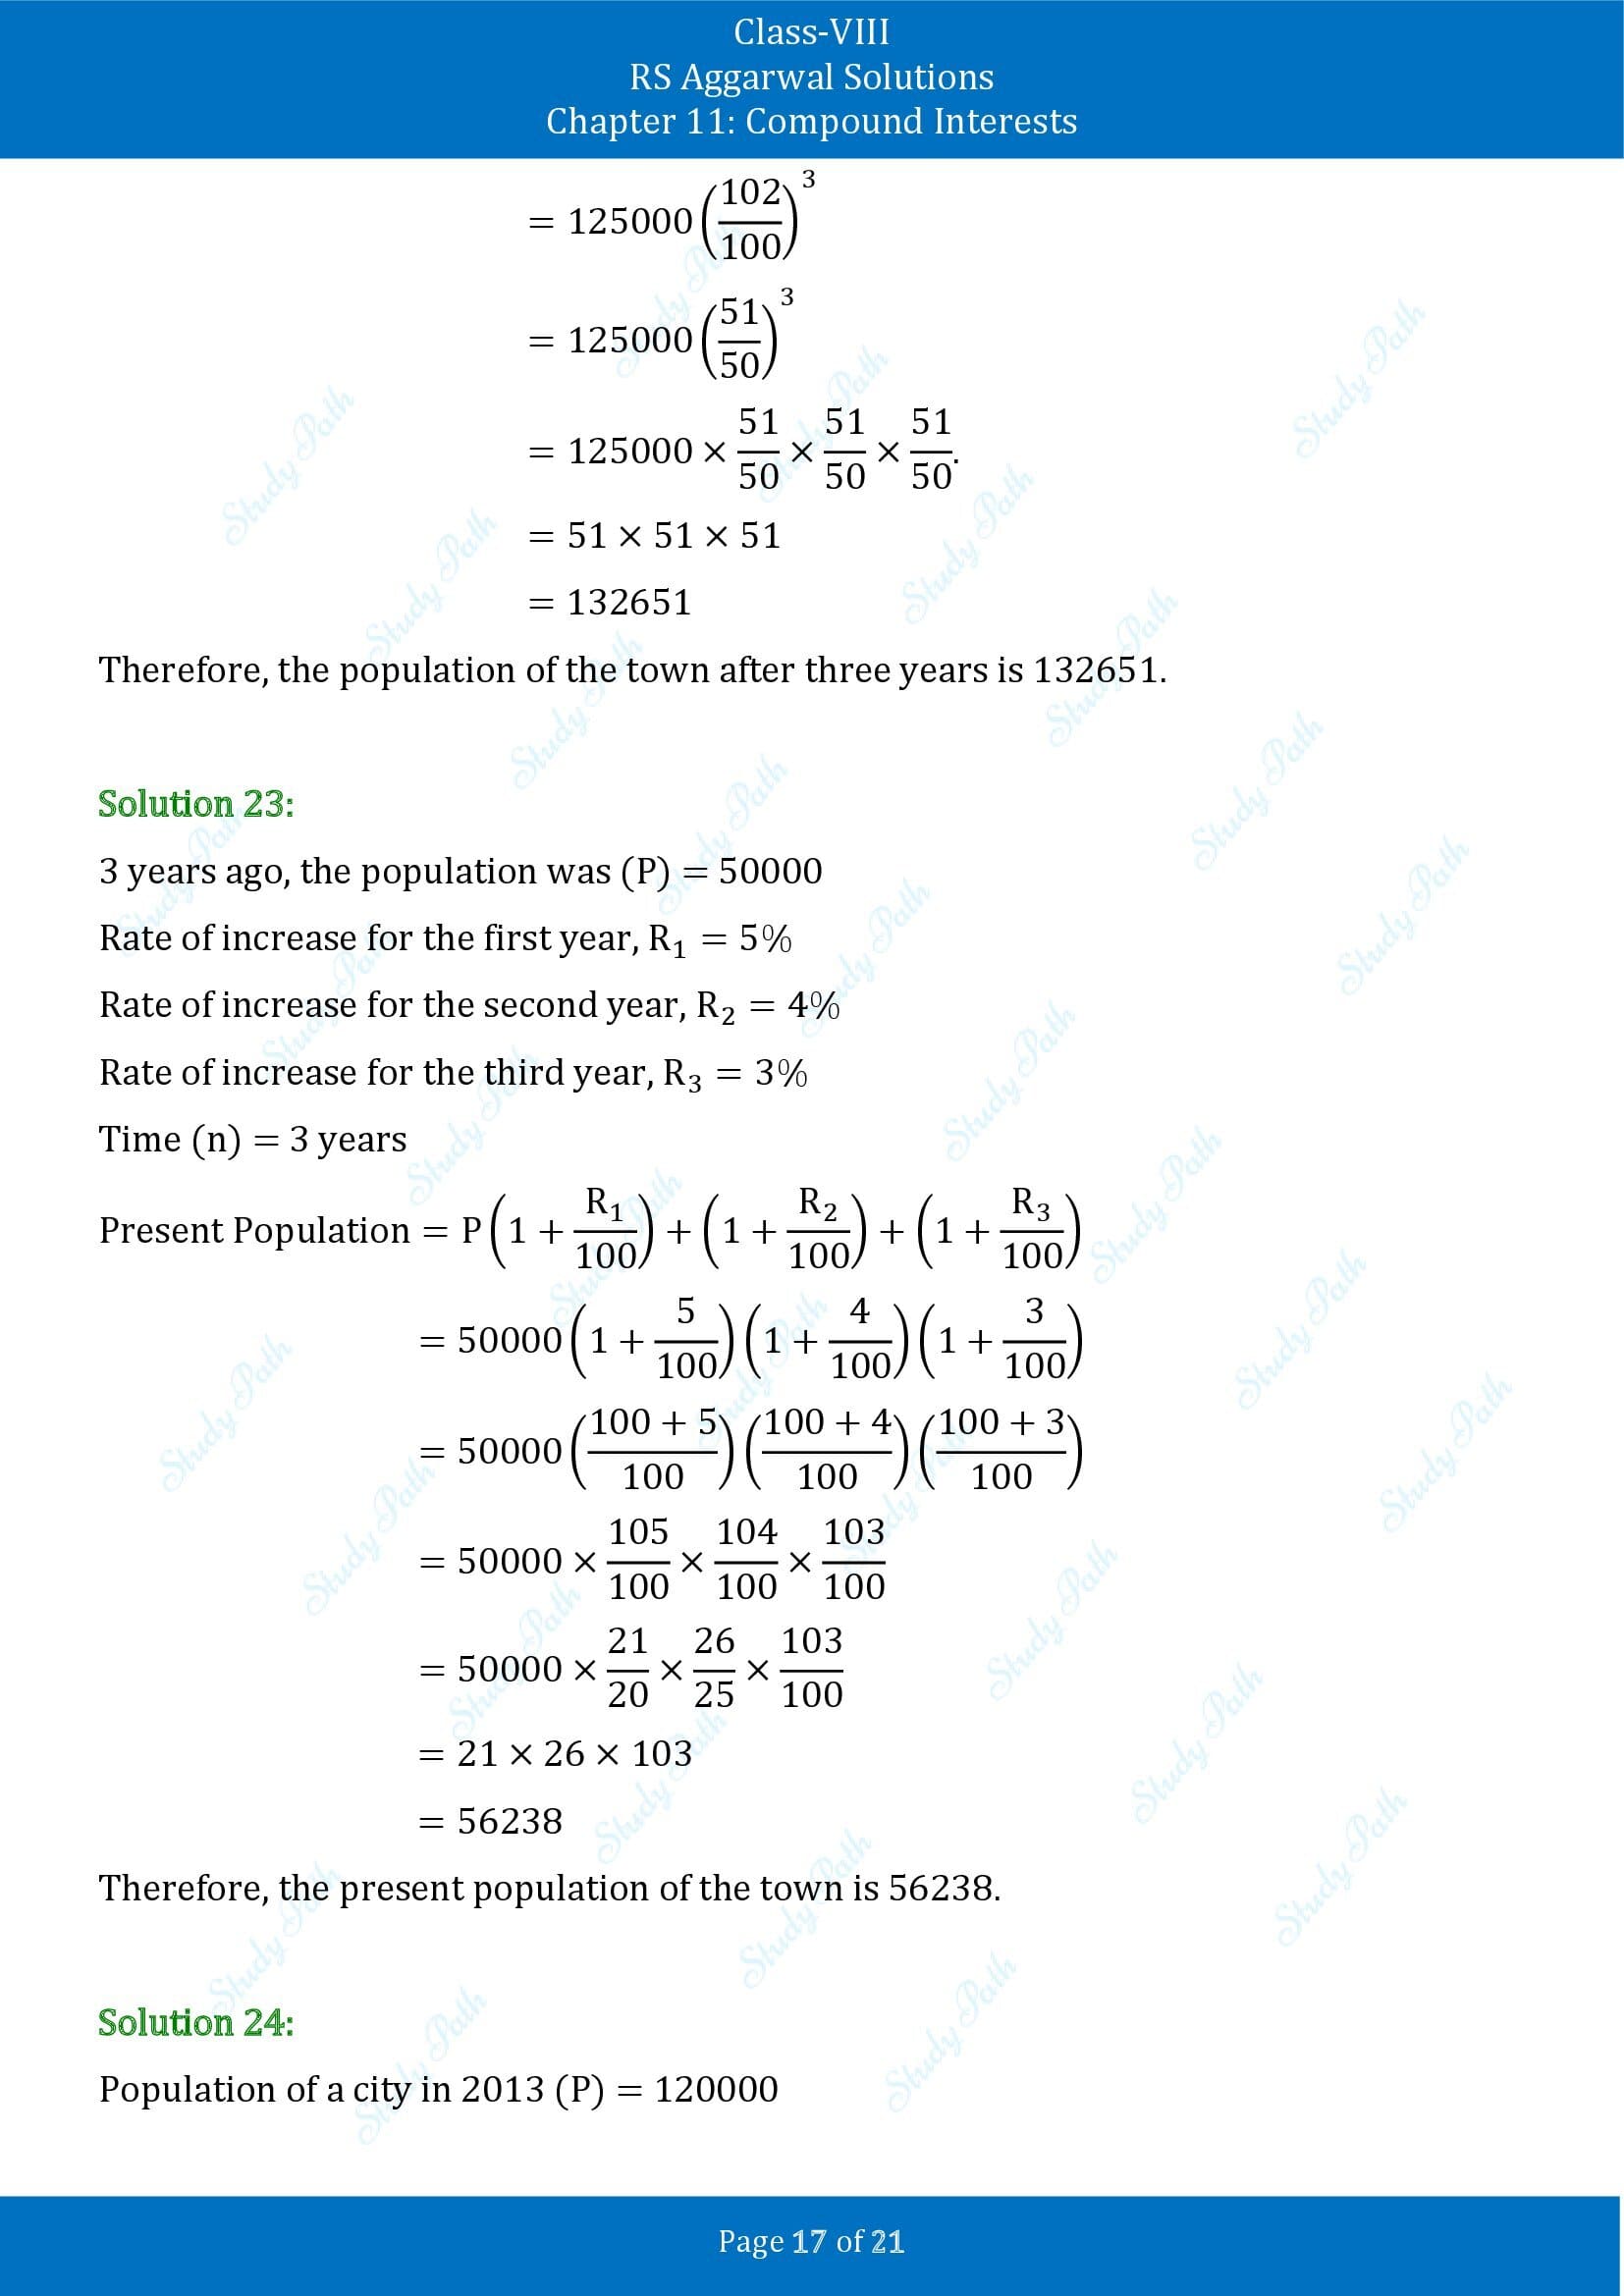 RS Aggarwal Solutions Class 8 Chapter 11 Compound Interests Exercise 11B 00017